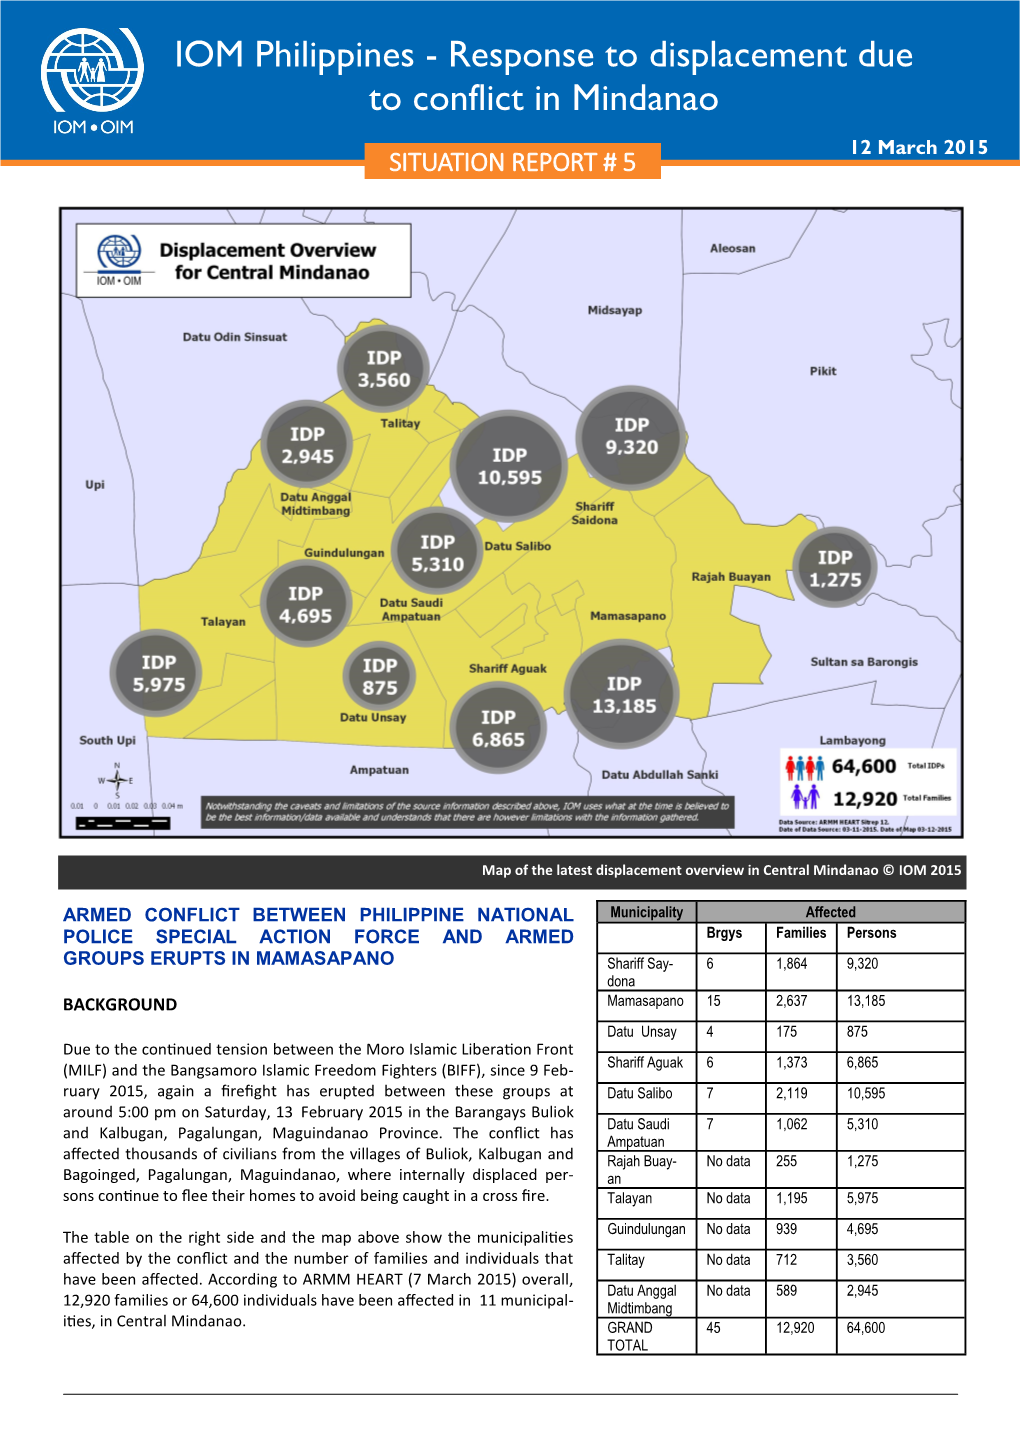 IOM Philippines - Response to Displacement Due to Conflict in Mindanao 12 March 2015 SITUATION REPORT # 5